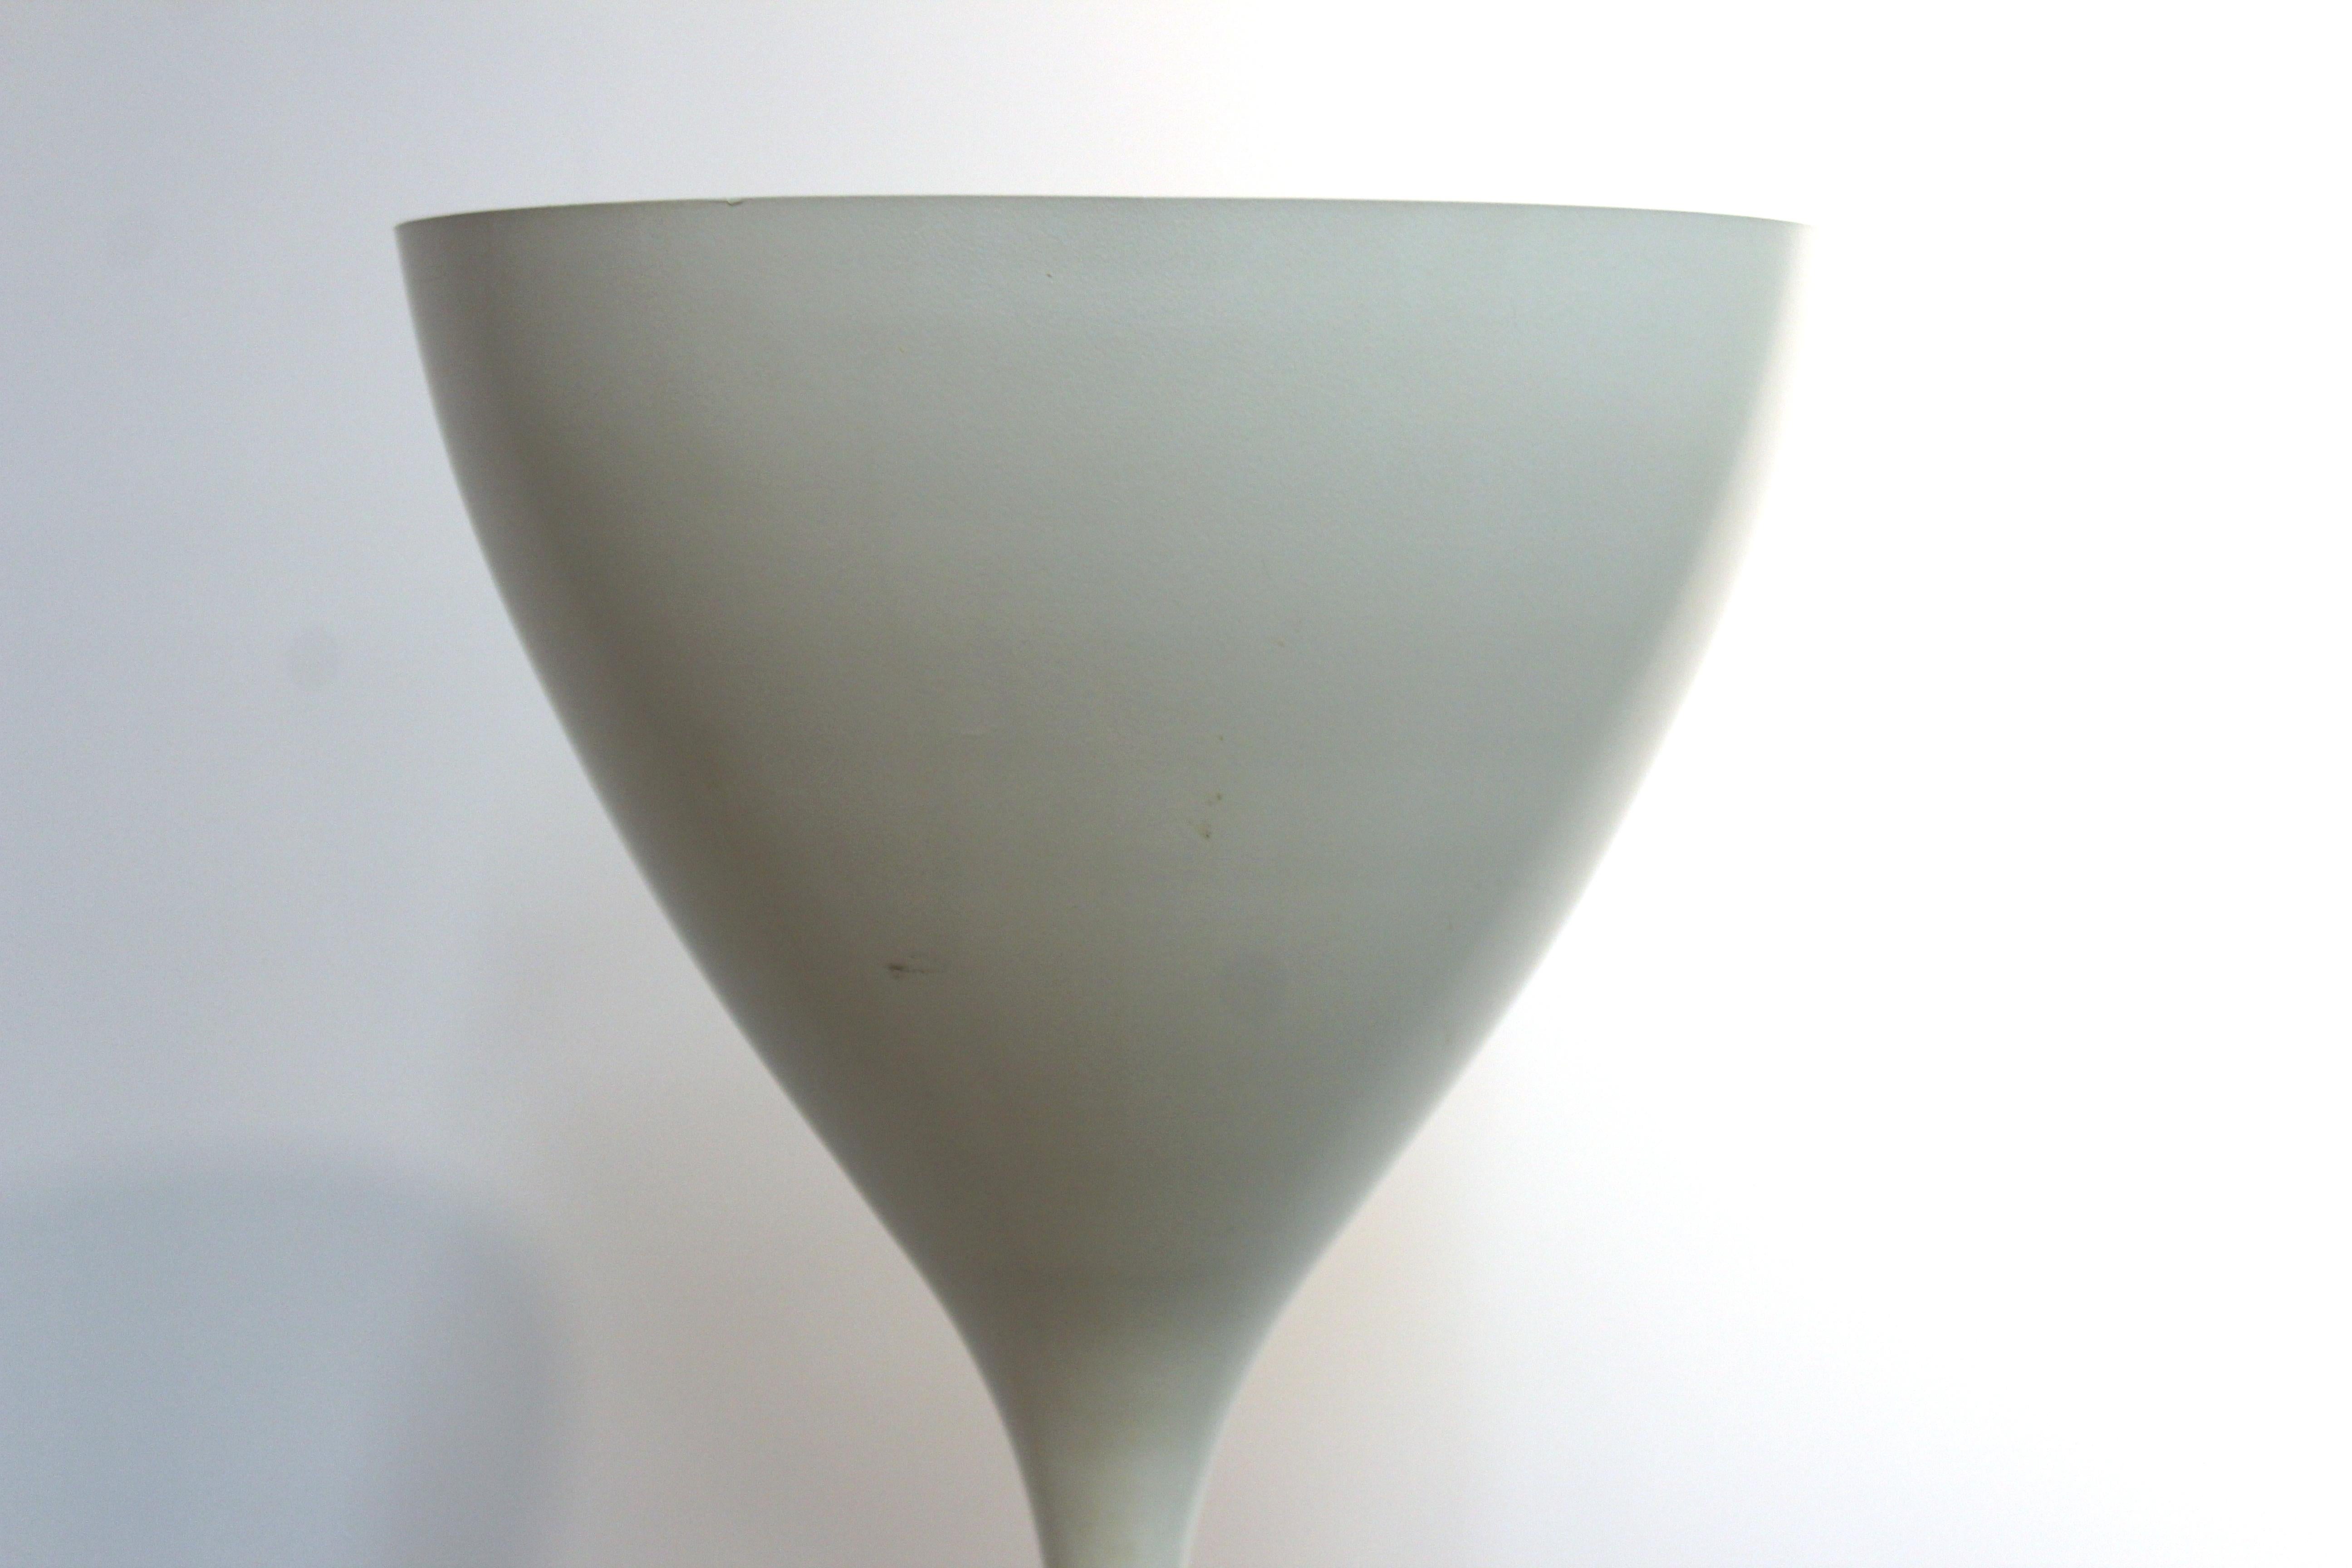 Mid-Century Modern white enameled torchere floor lamp designed by Max Bill during the 1960s. The piece is in great vintage condition and has some age-related scratches to the enamel on the foot. Comes with a dimmer.